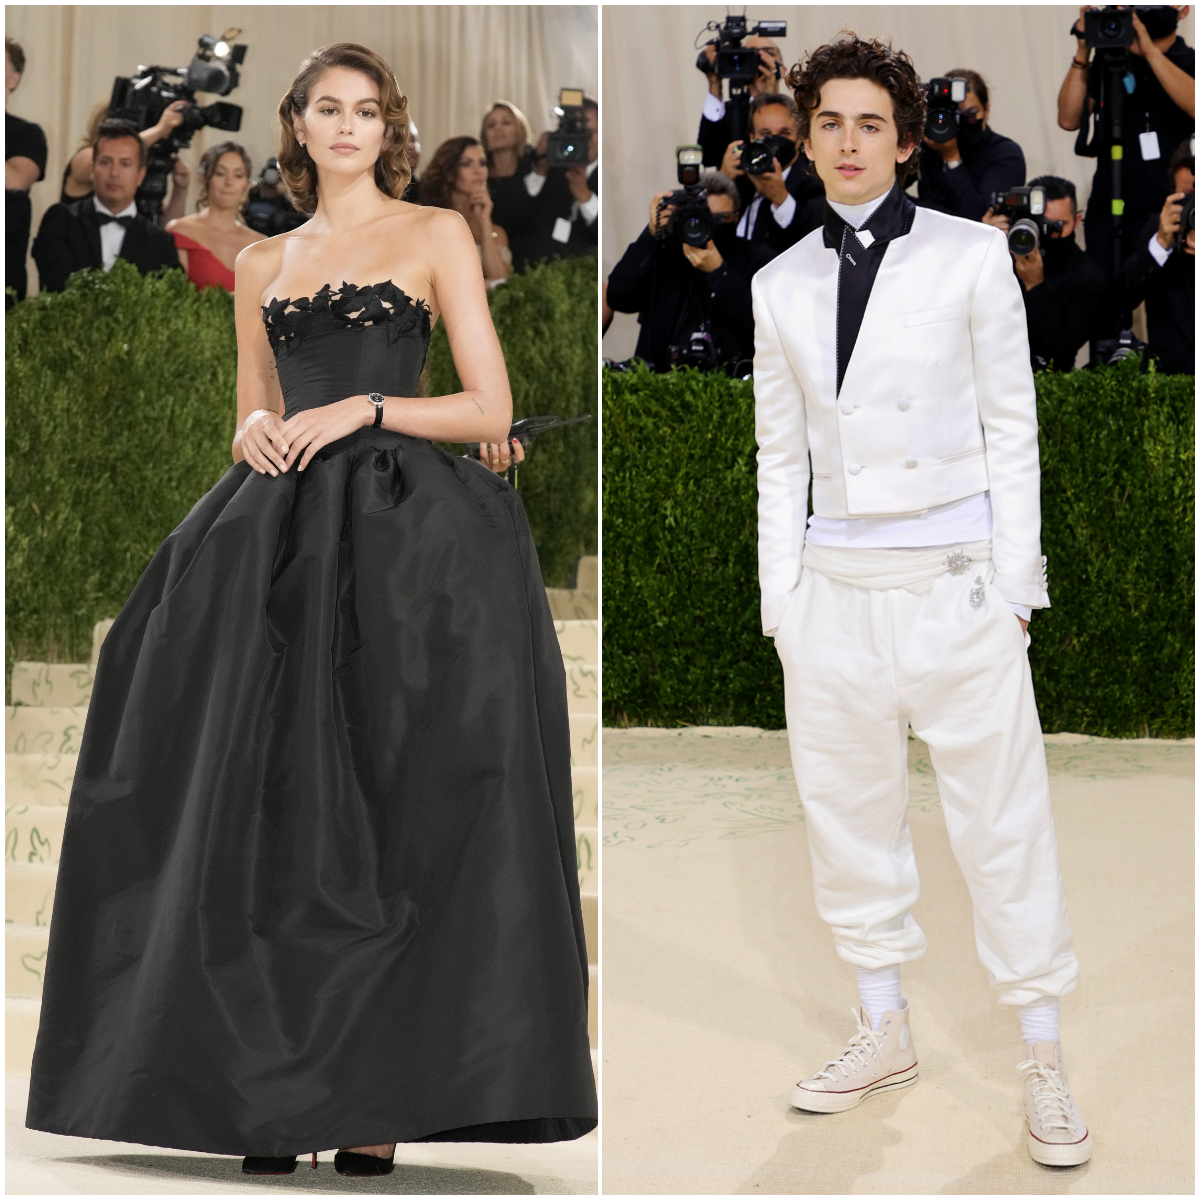 Hollywood Connection – Met Gala 2021